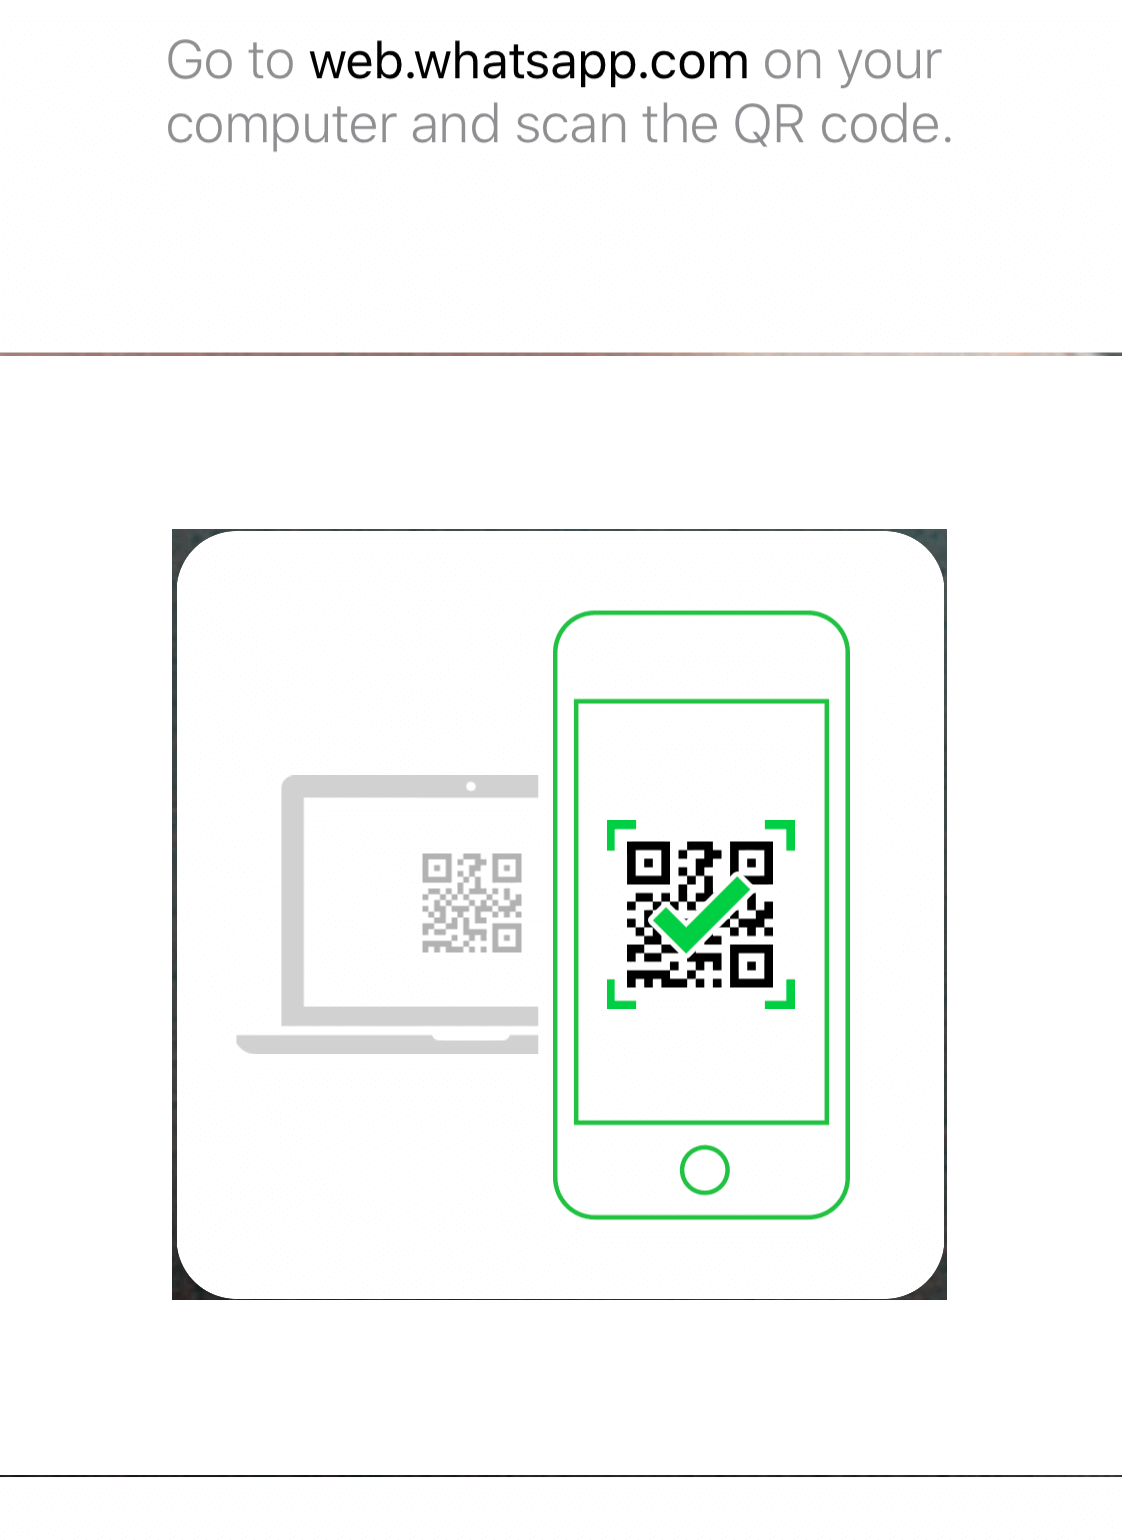 scan-the-qr-code-using-your-phone-and-whatsapp-web-will-open-up-2049680